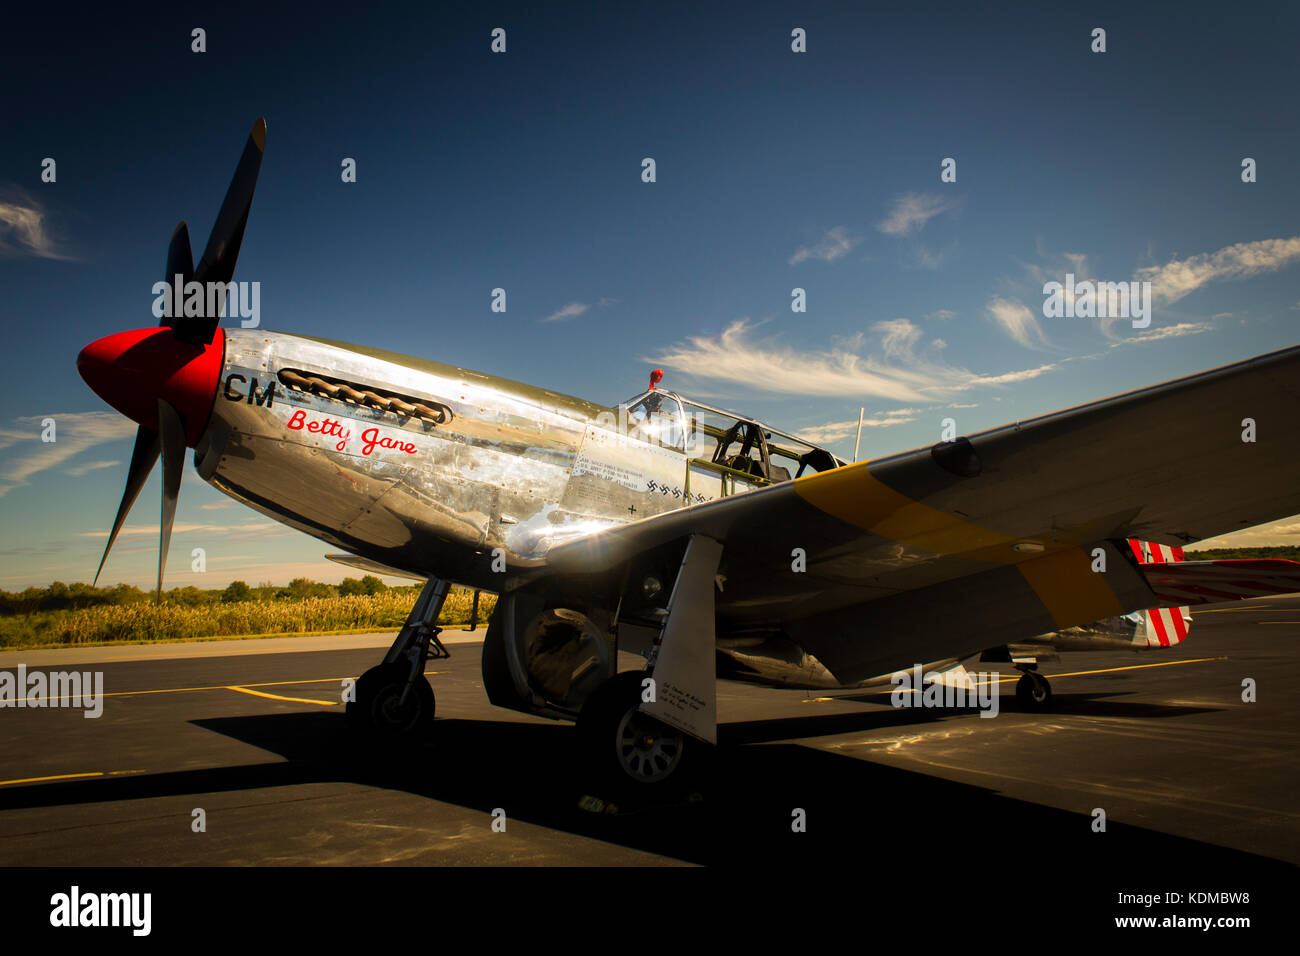 P-51 Mustang fighter plane Stock Photo